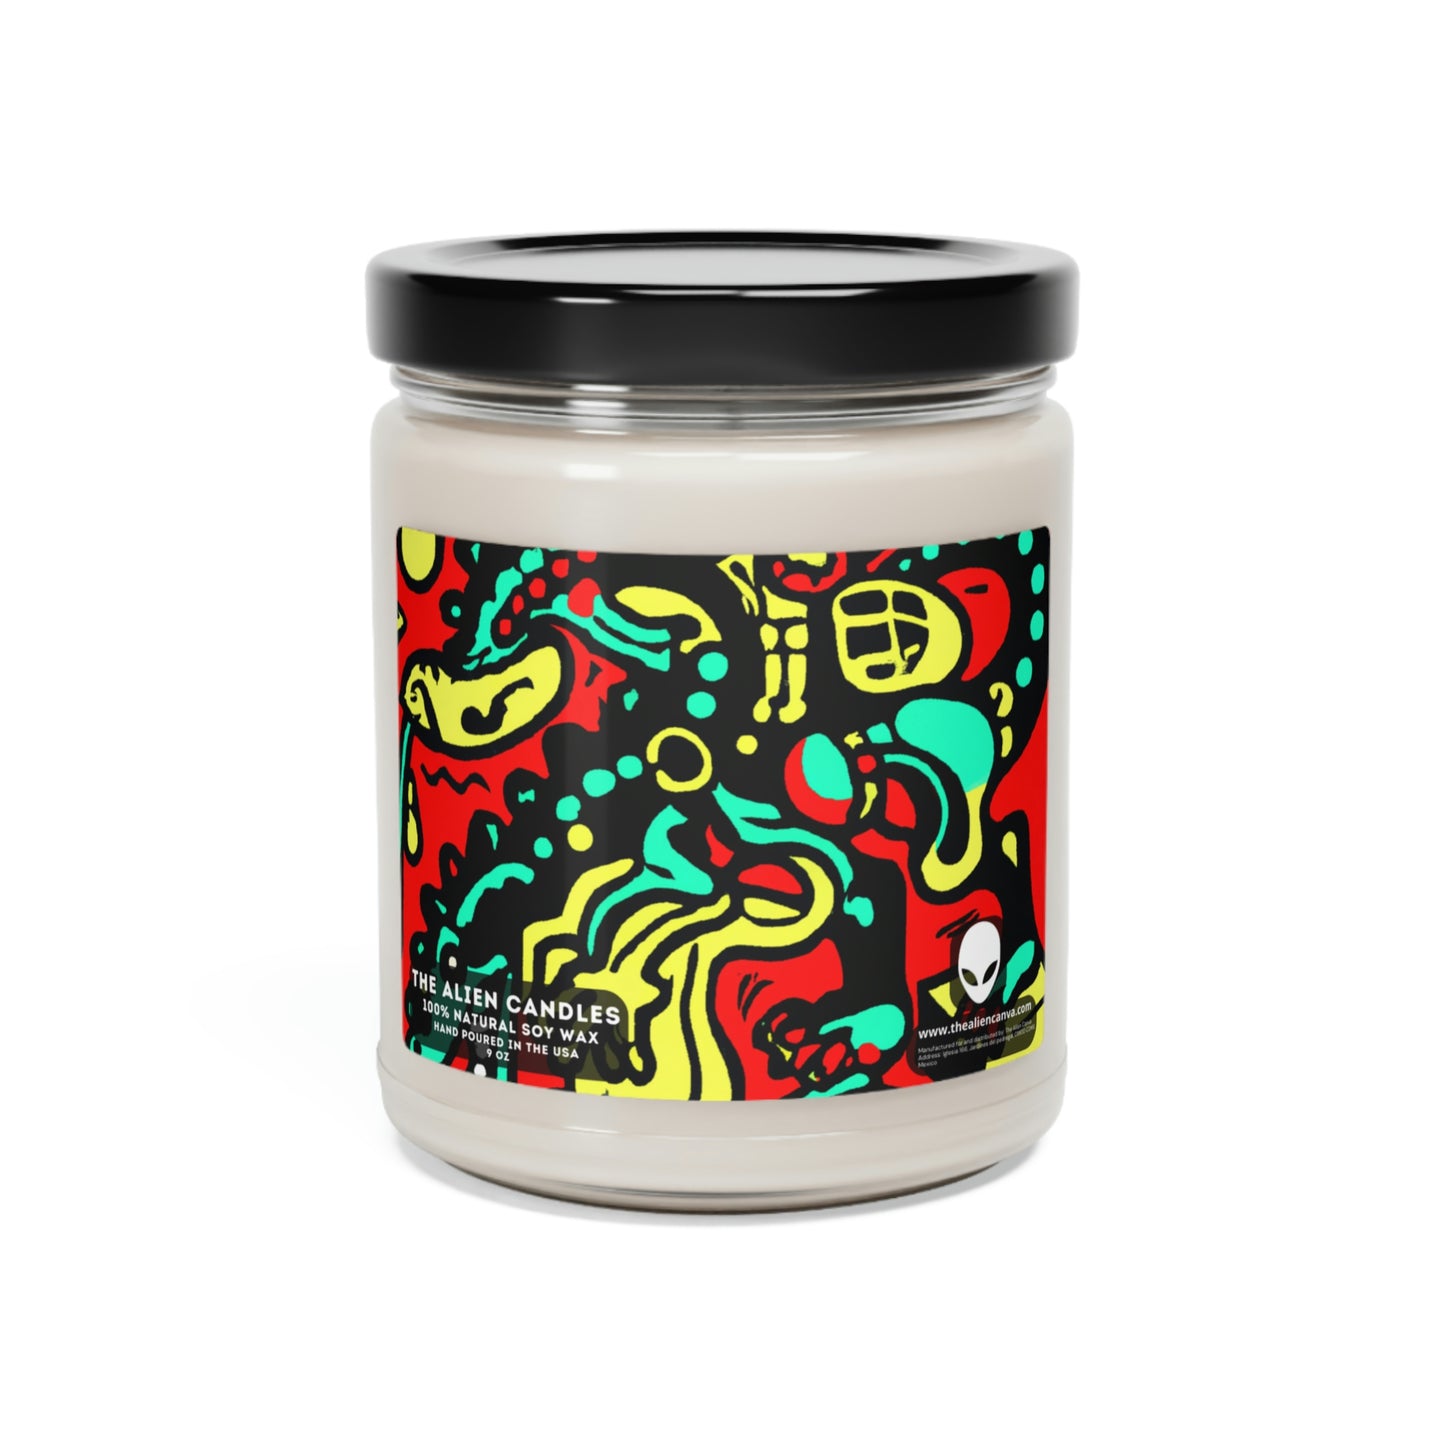 The Hoard of the Ancient Dragon - Scented Soy Candle, 9oz - The Alien Candles